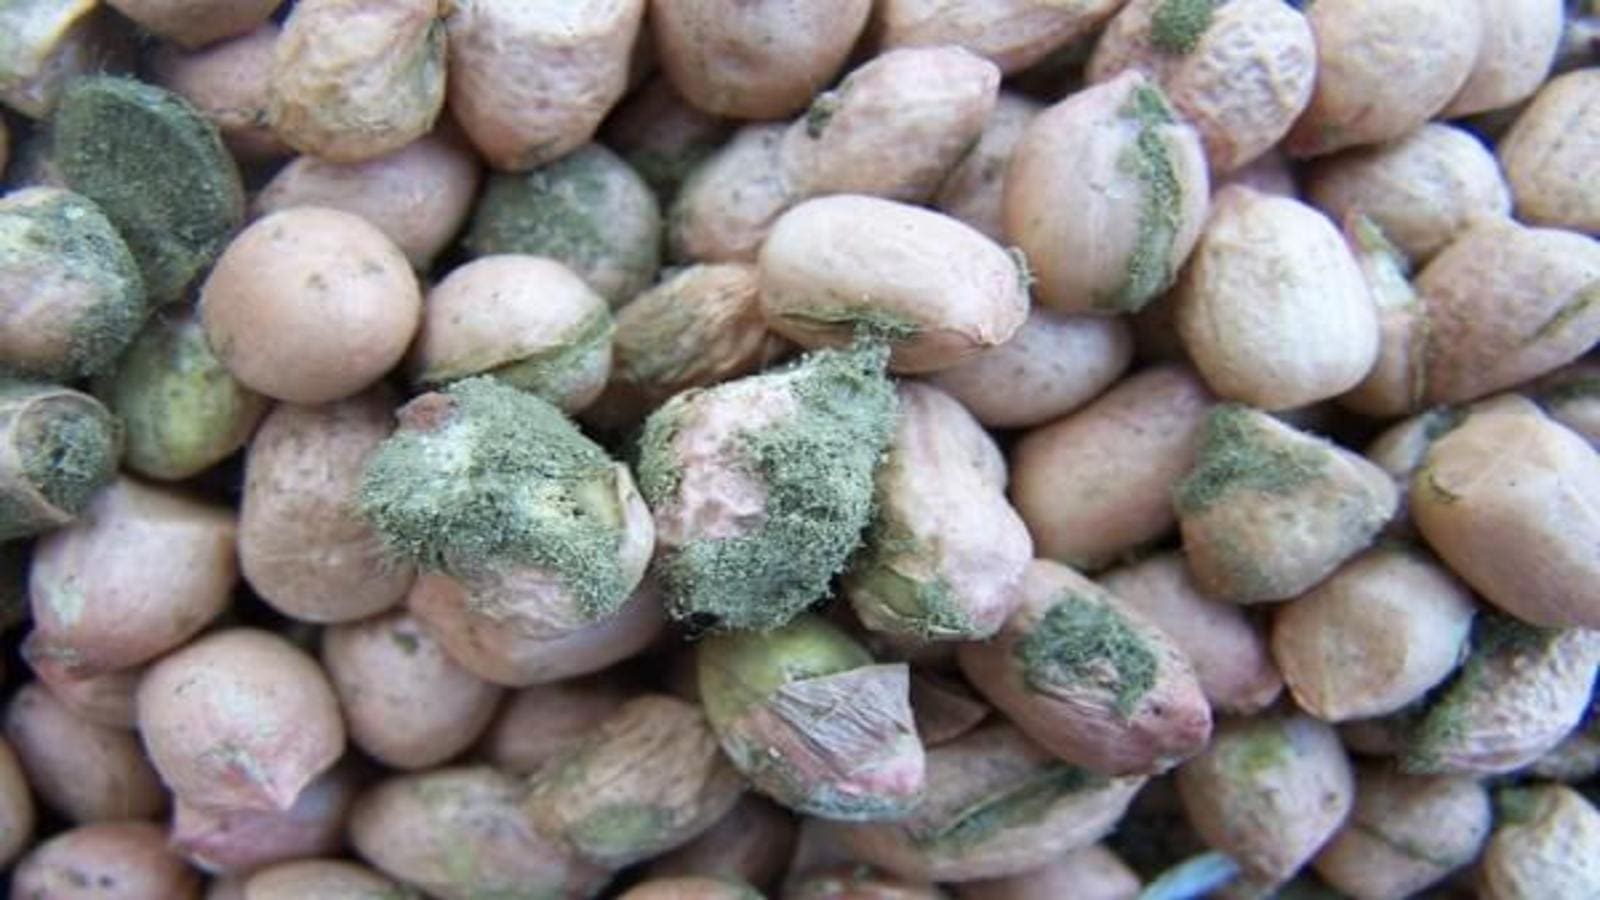 Researchers link aflatoxins to rising cancer cases in Kenya